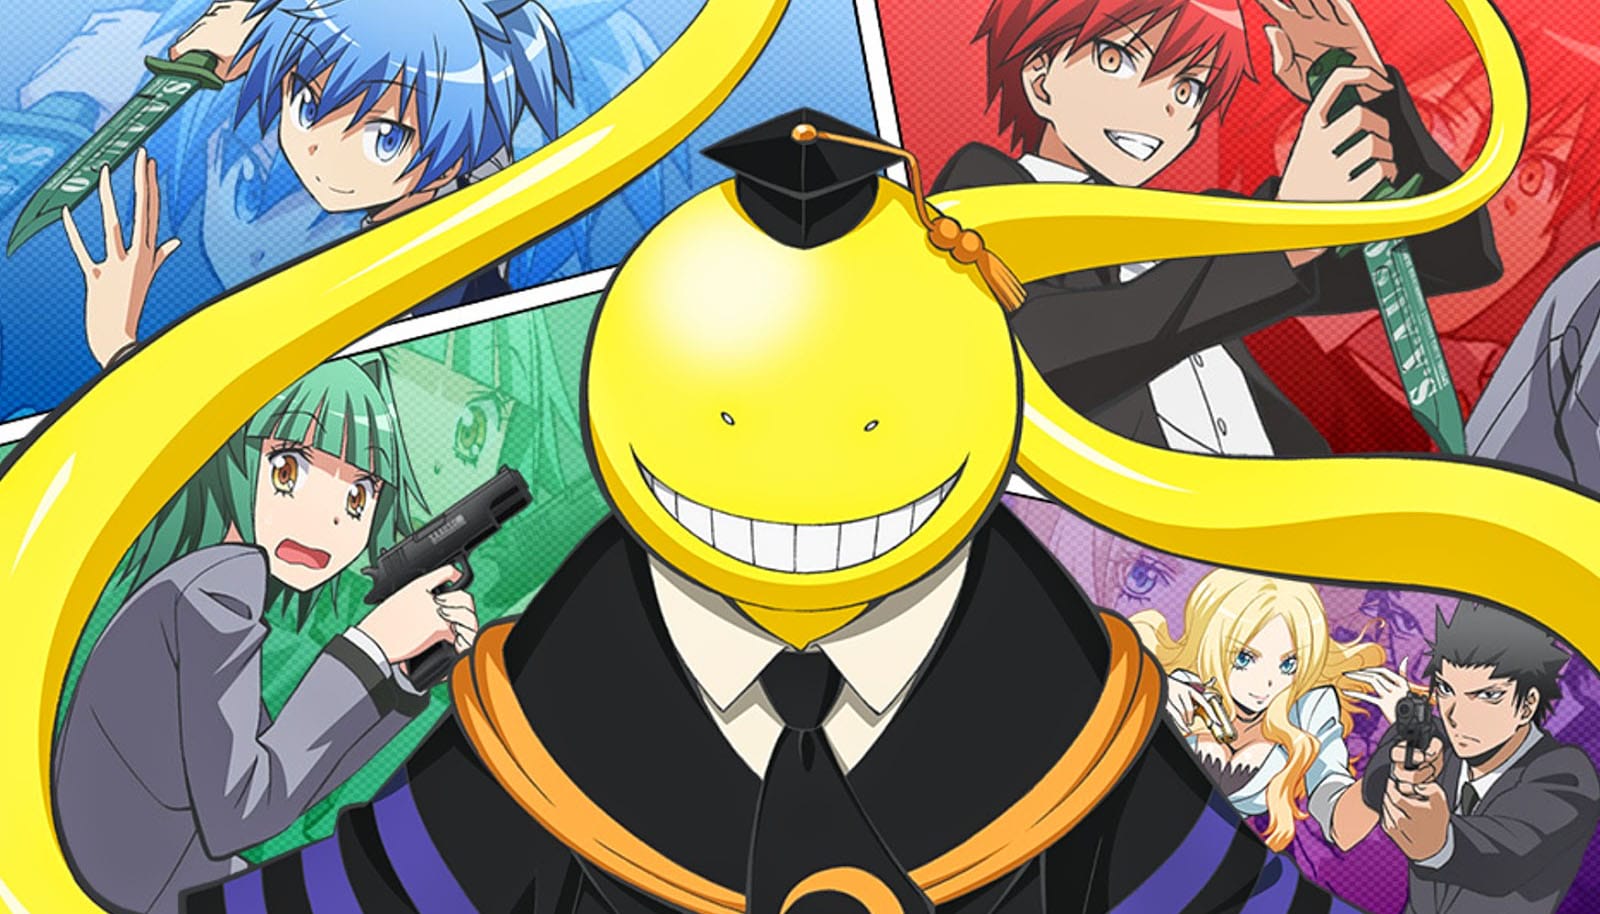 A Story Of Growing Up And Learning To Kill People An Assassination Classroom The Movie 365 Days Time Review